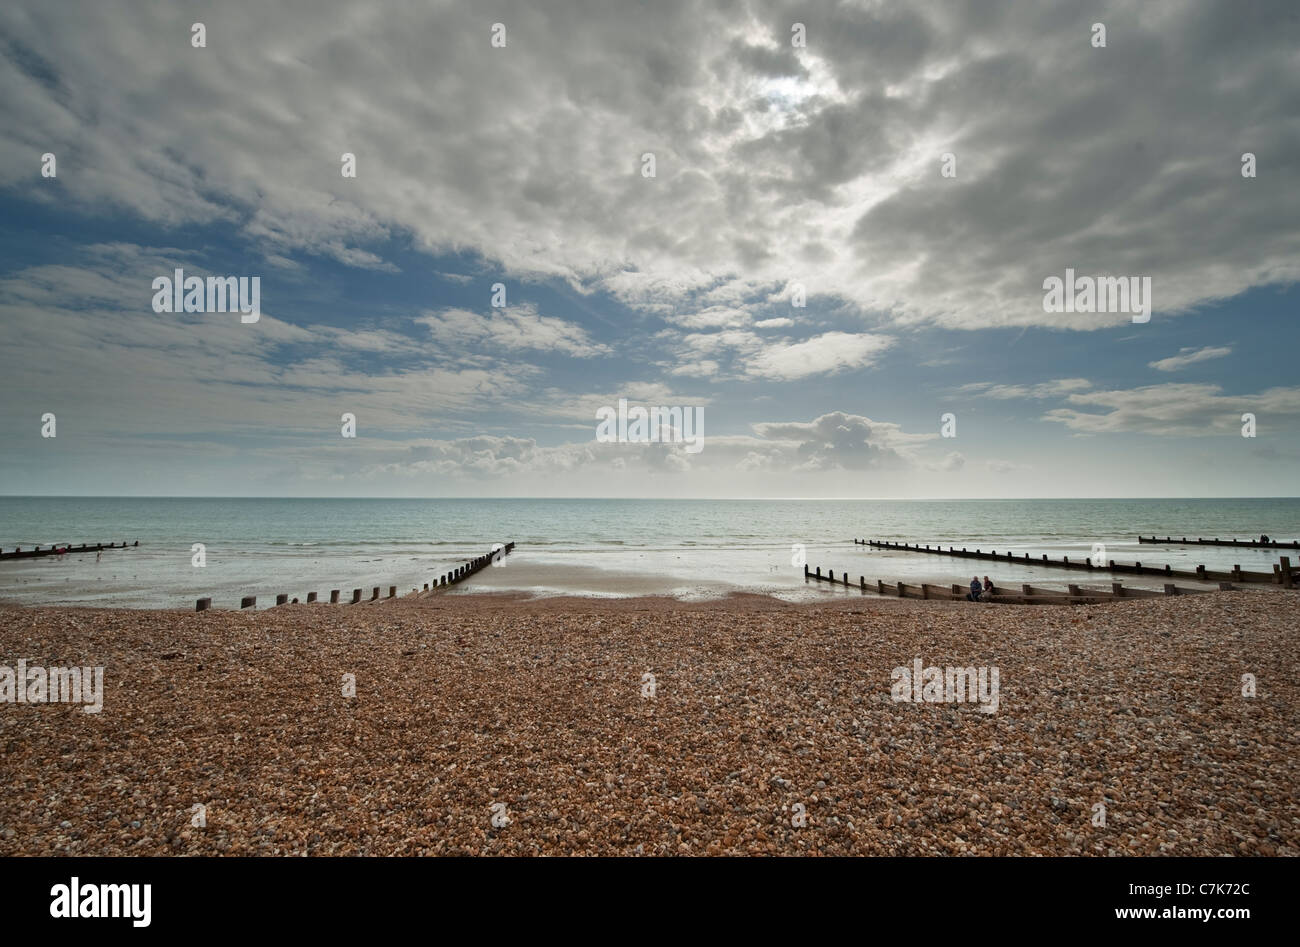 The shingle beach on the seafront at Bognor Regis at low tide, West Sussex, England with dramatic sky. Stock Photo